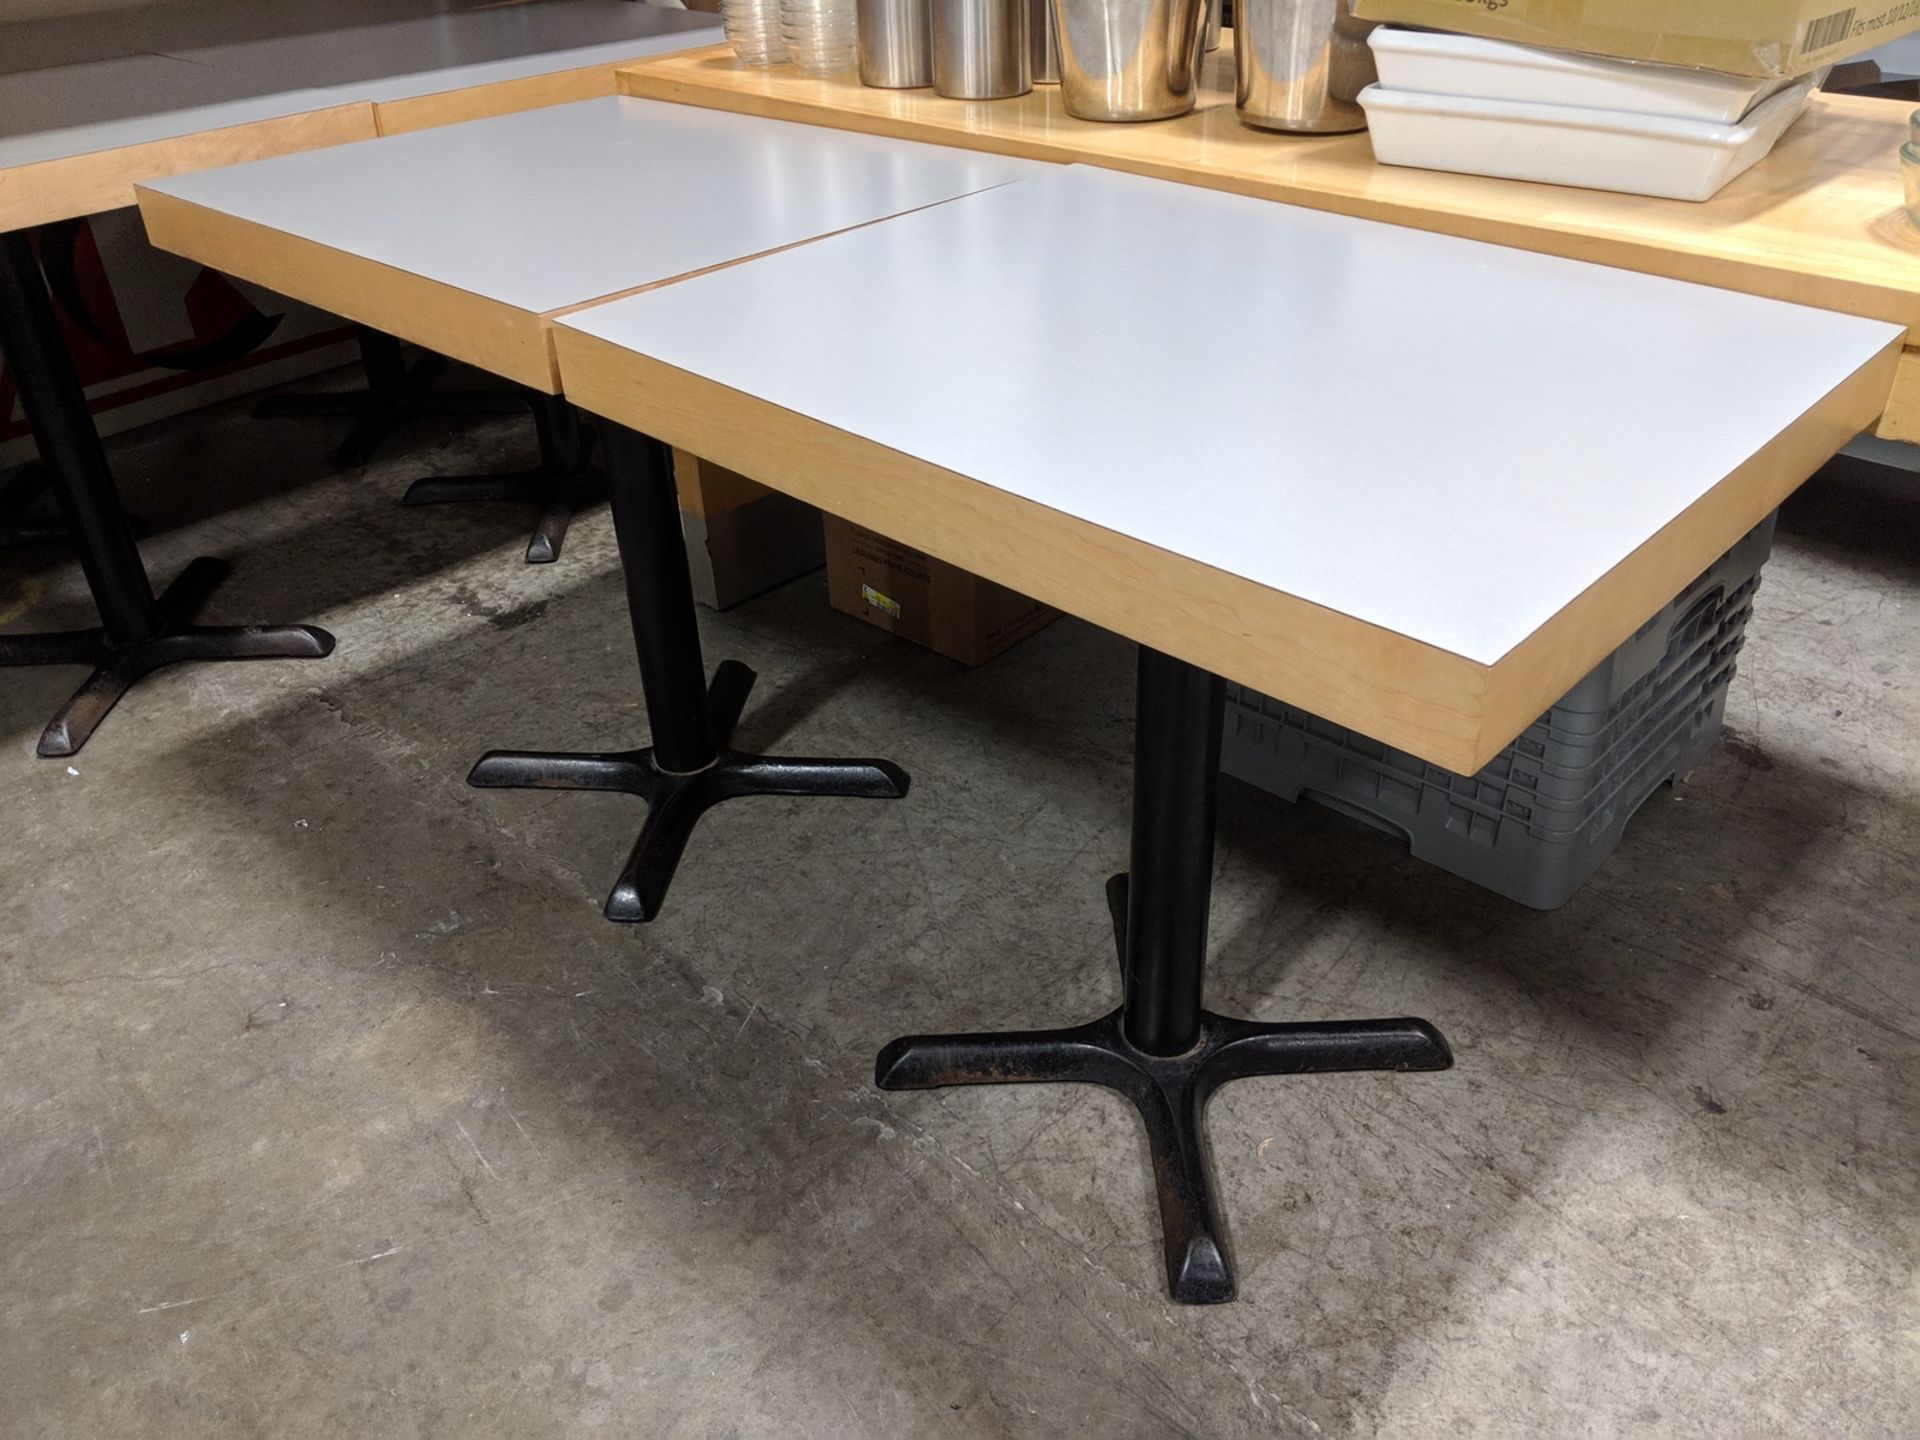 24" x 30" x 30" Dining Tables - Lot of 2